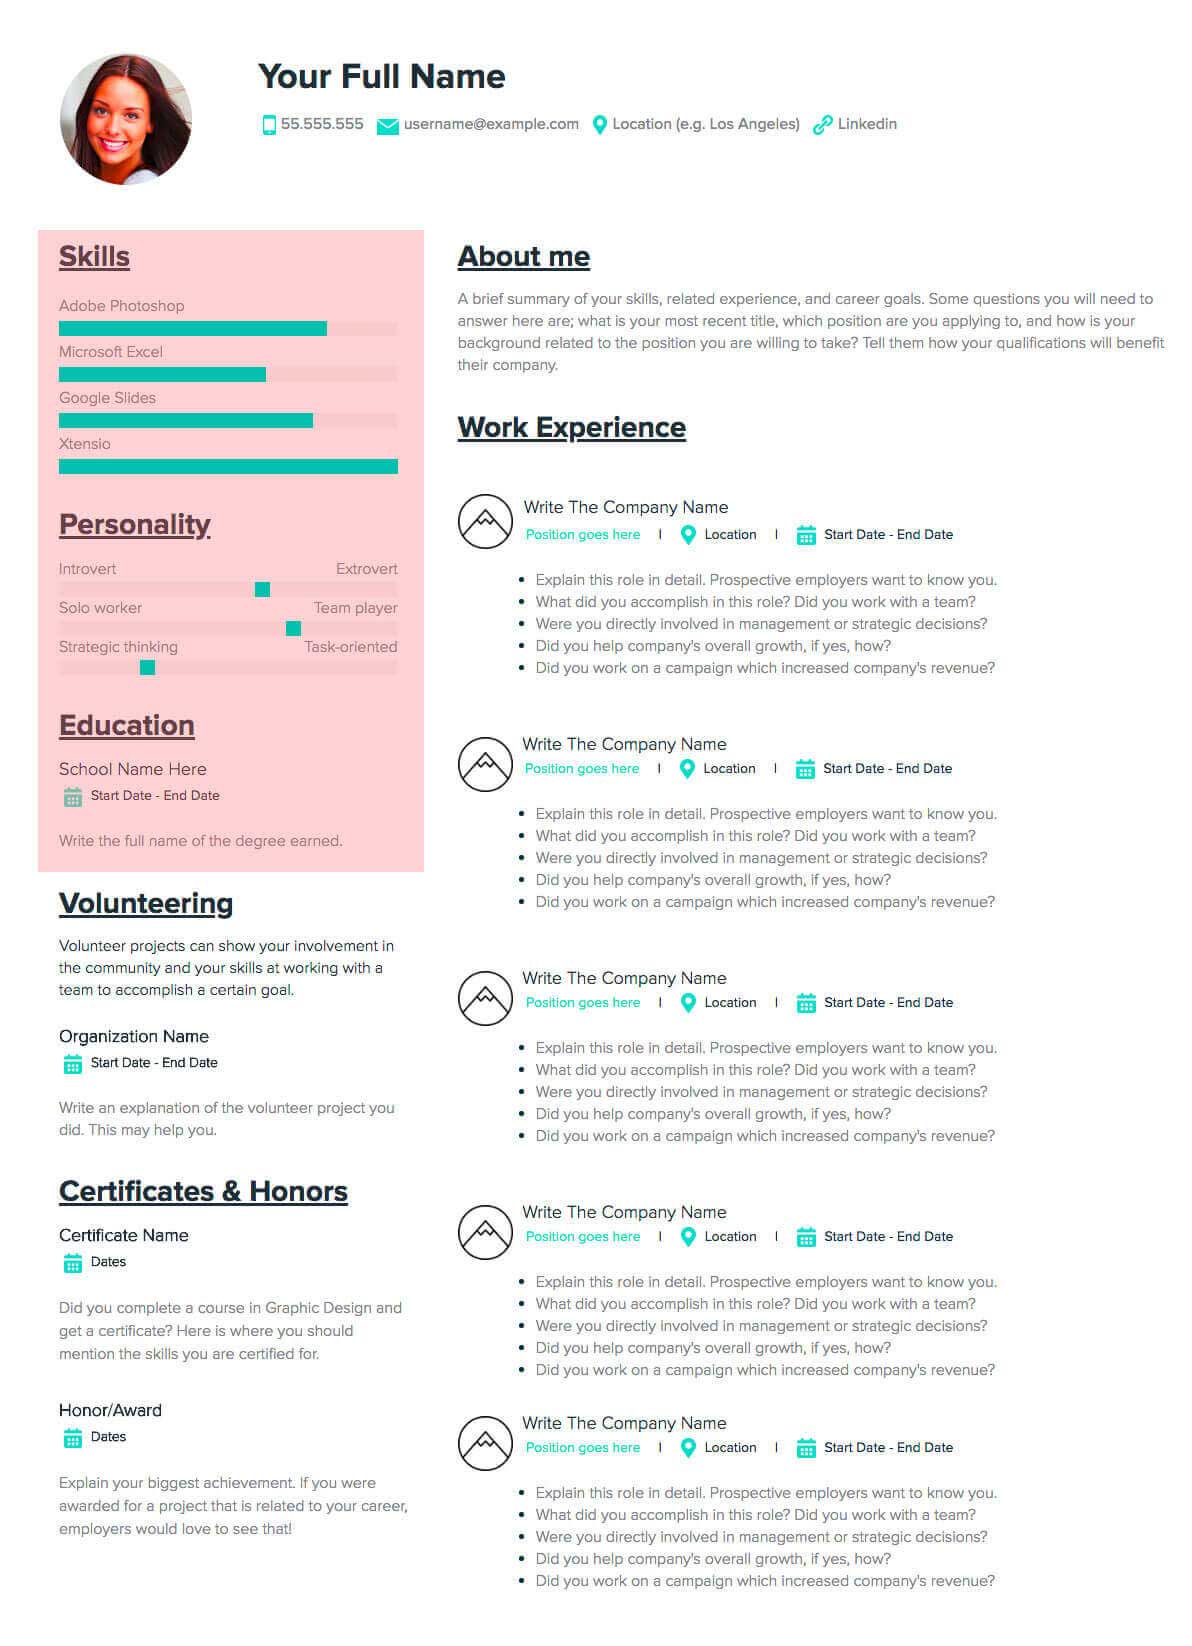 How to Make a Resume, Skills and Personality